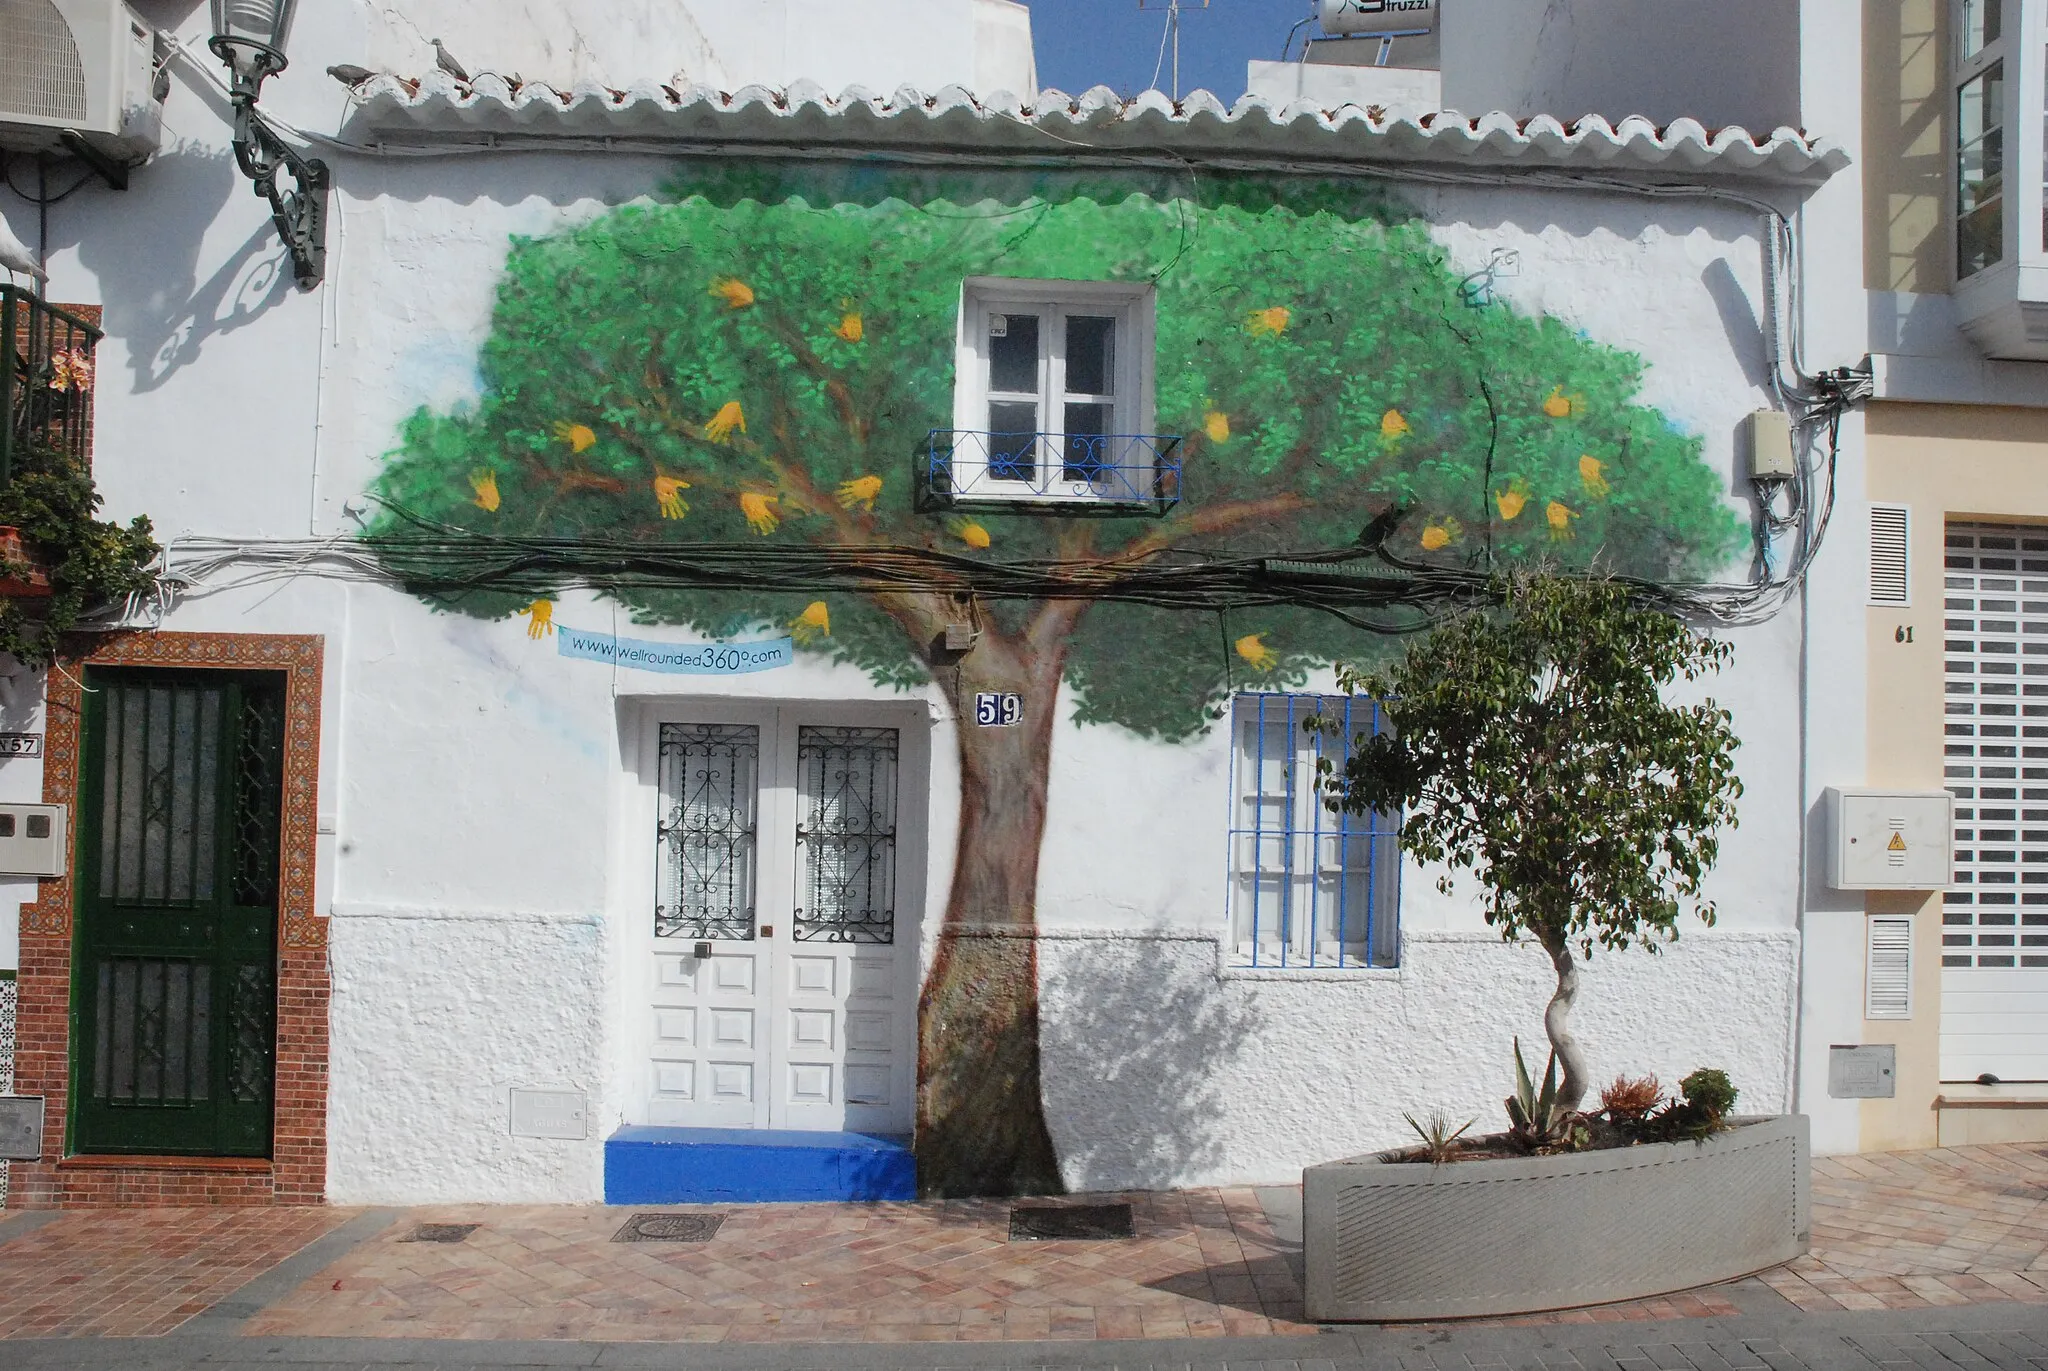 Photo showing: House with wallimage of tree